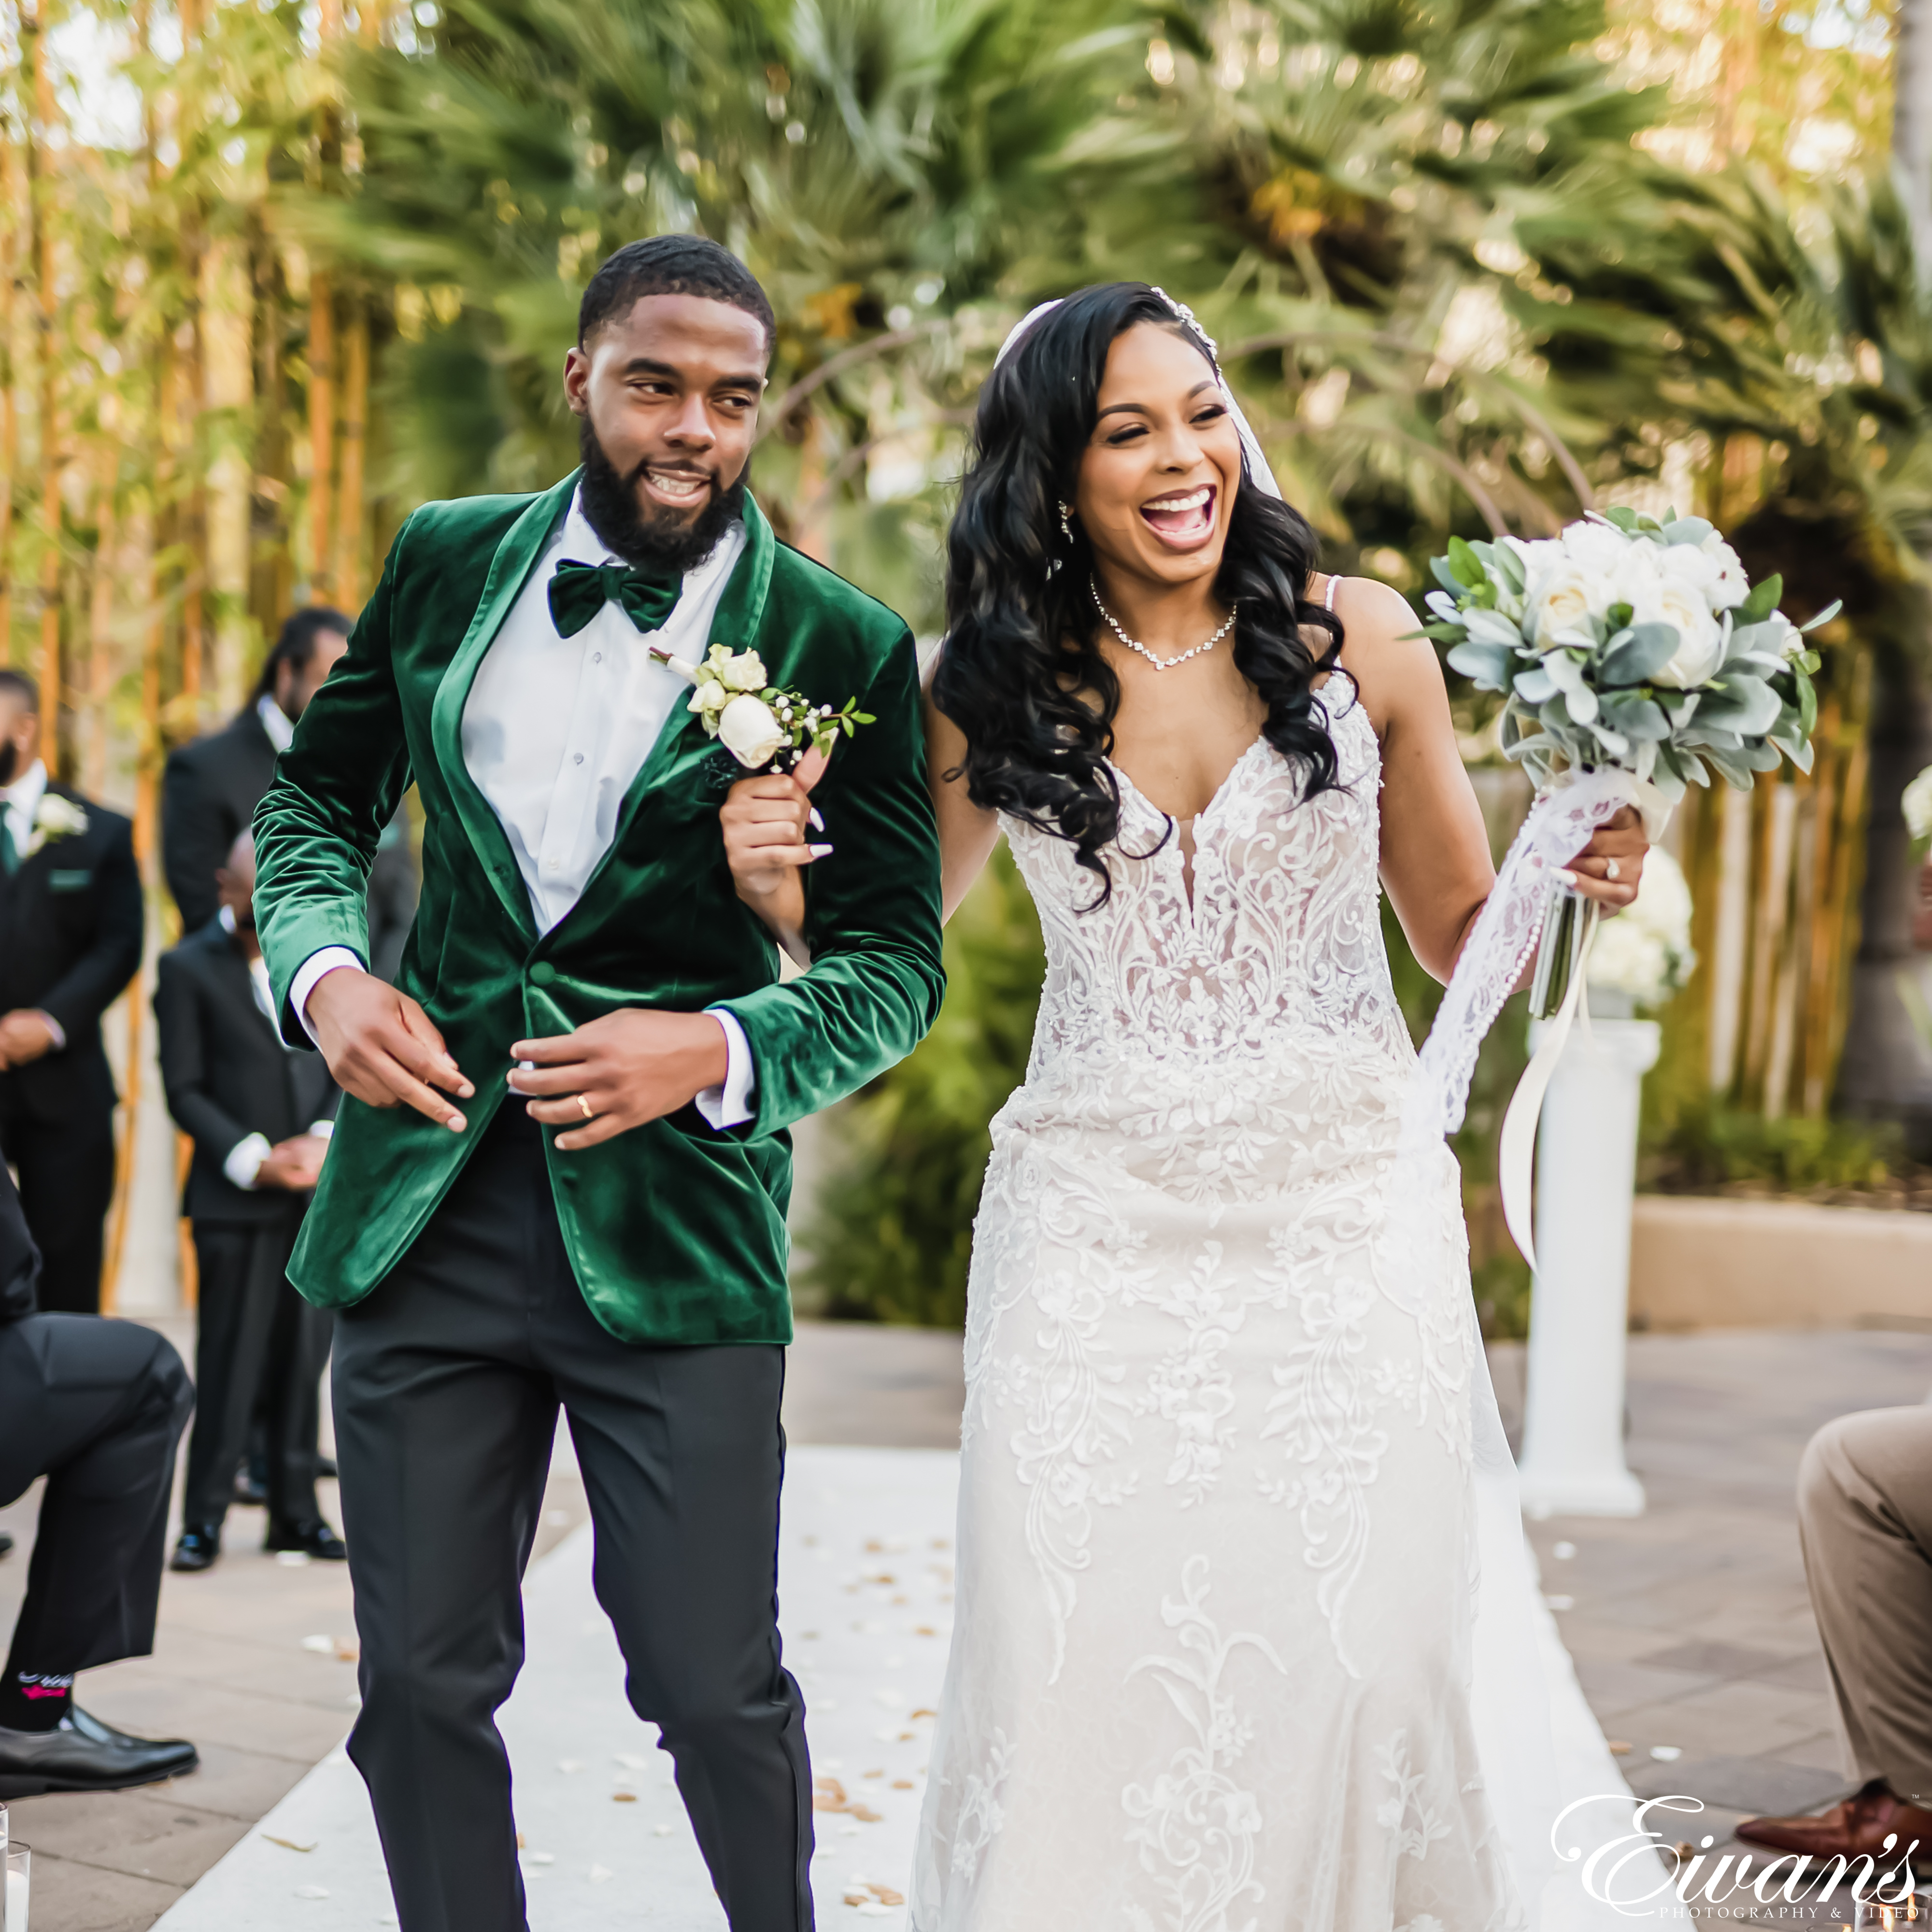 How to Capture Candid Wedding Moments